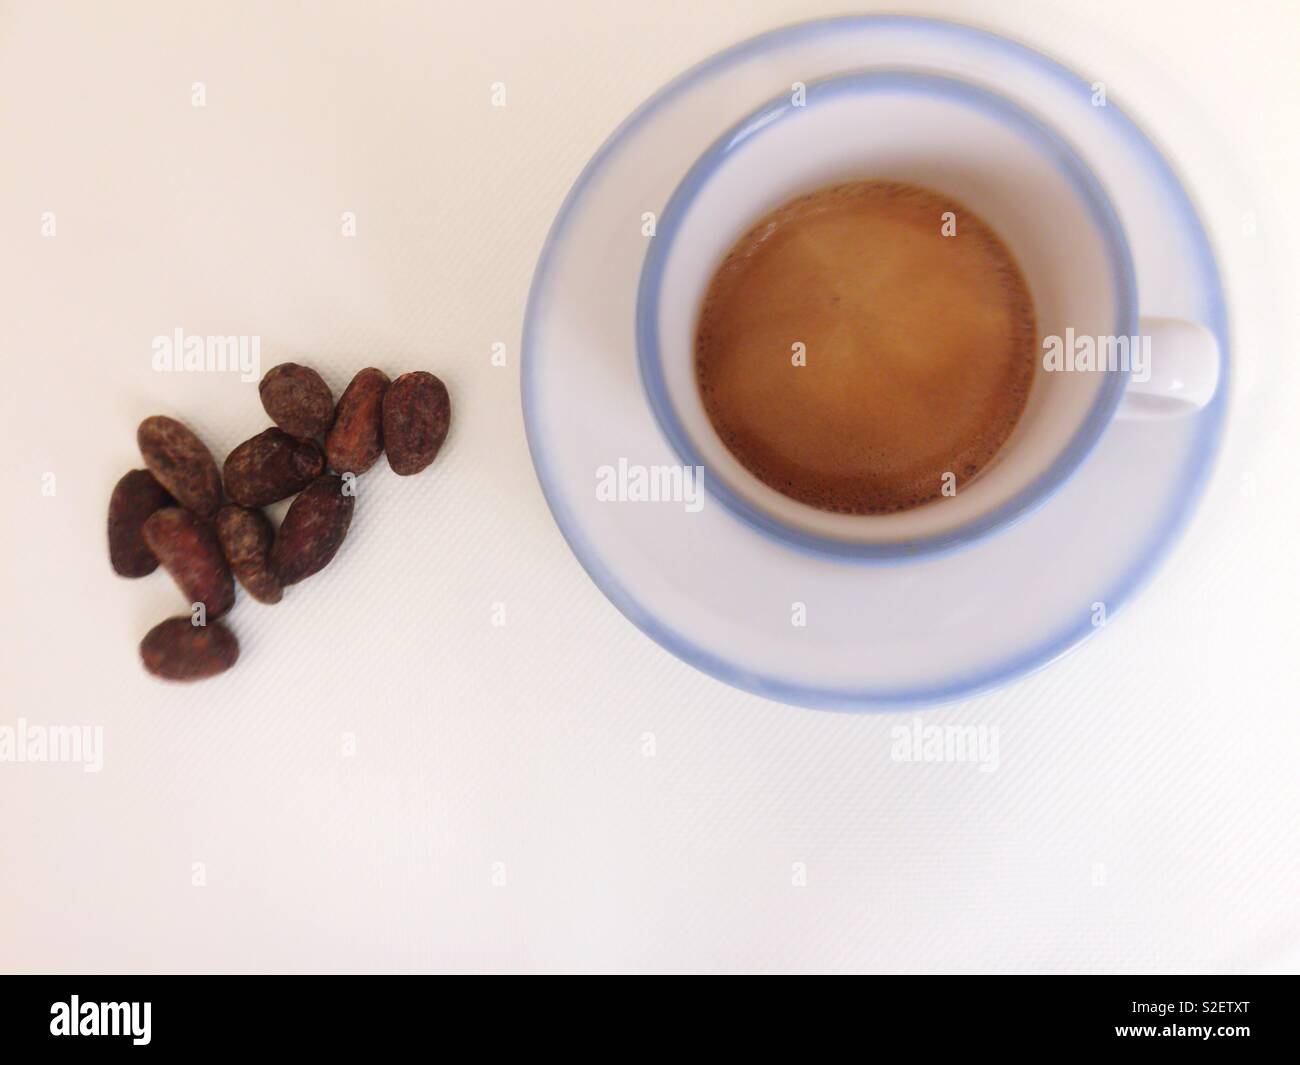 Coffe and cacao beans Stock Photo